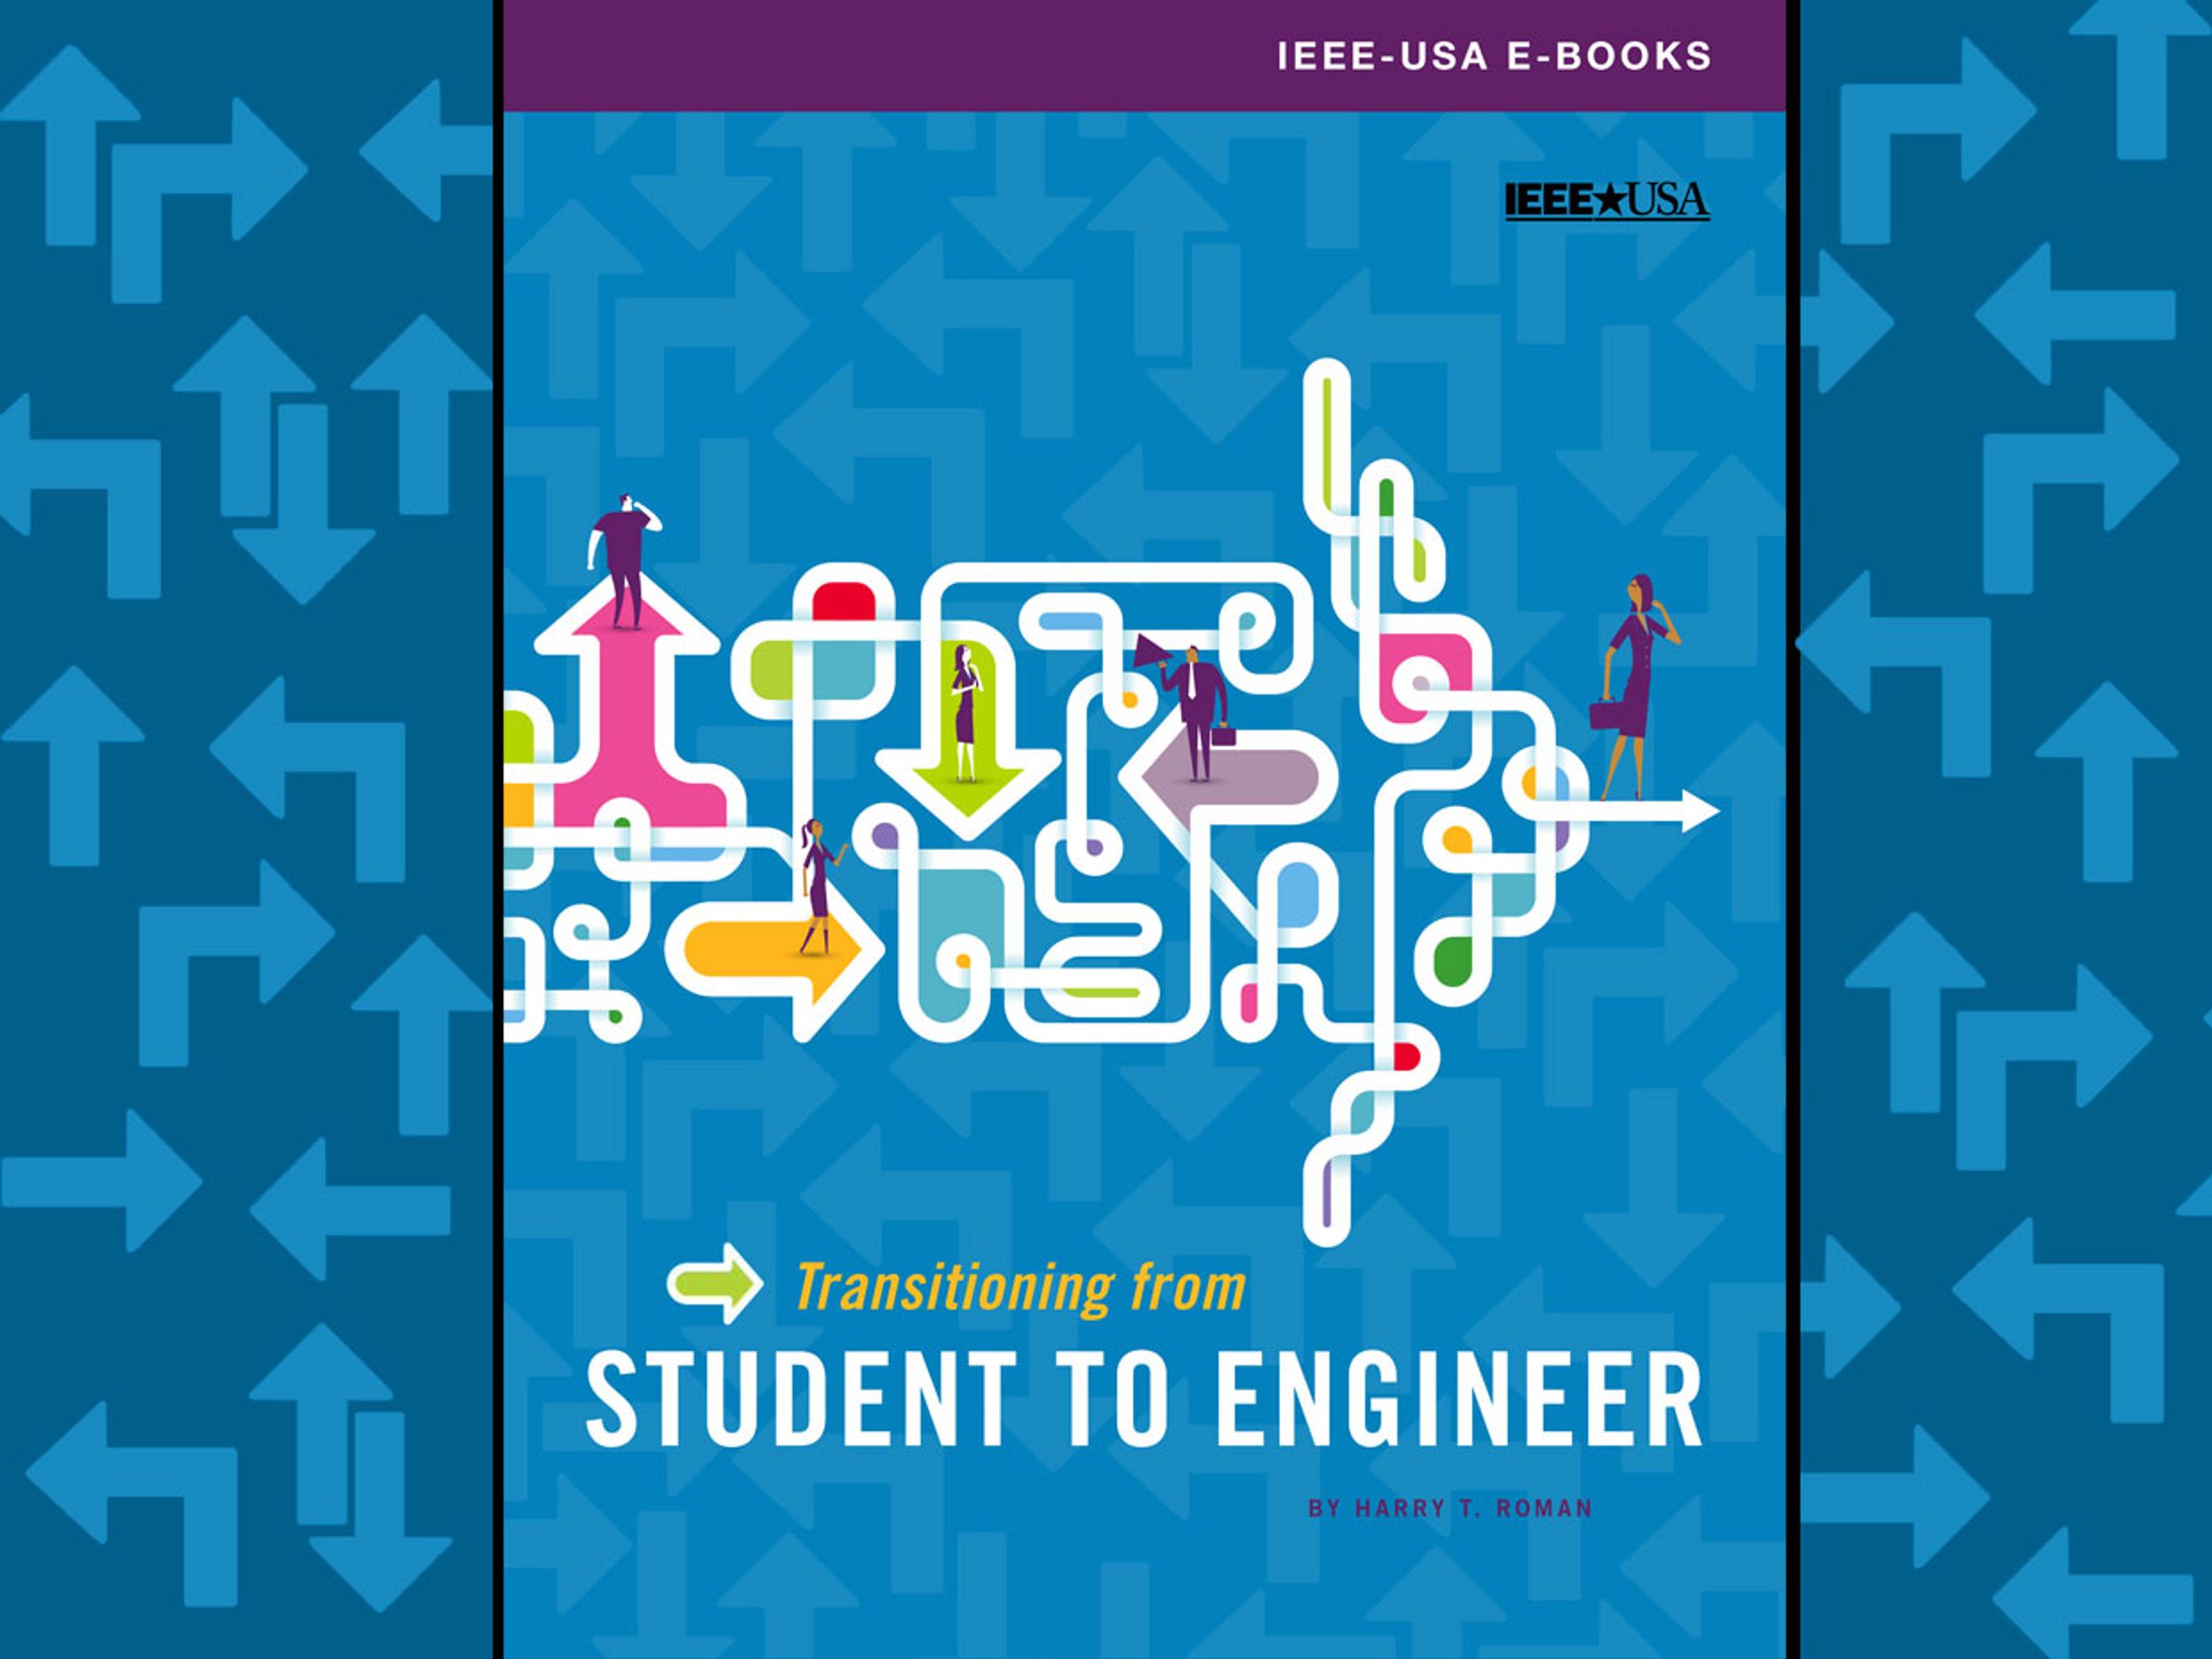 Cover of the new IEEE-USA e-book, Transitioning from Student to Engineer.